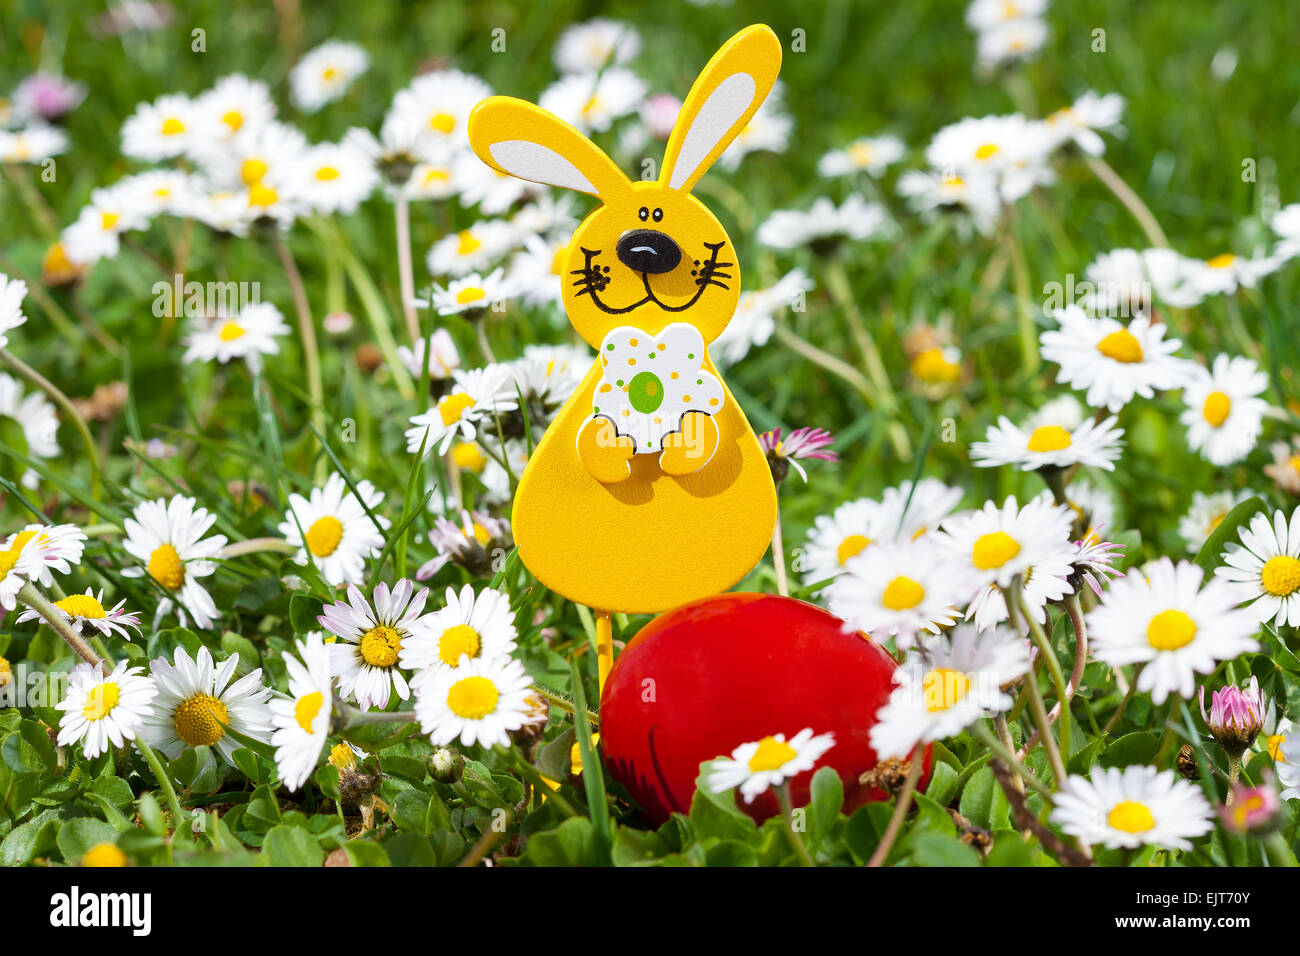 Easter egg decoration in green grass with flowers Stock Photo